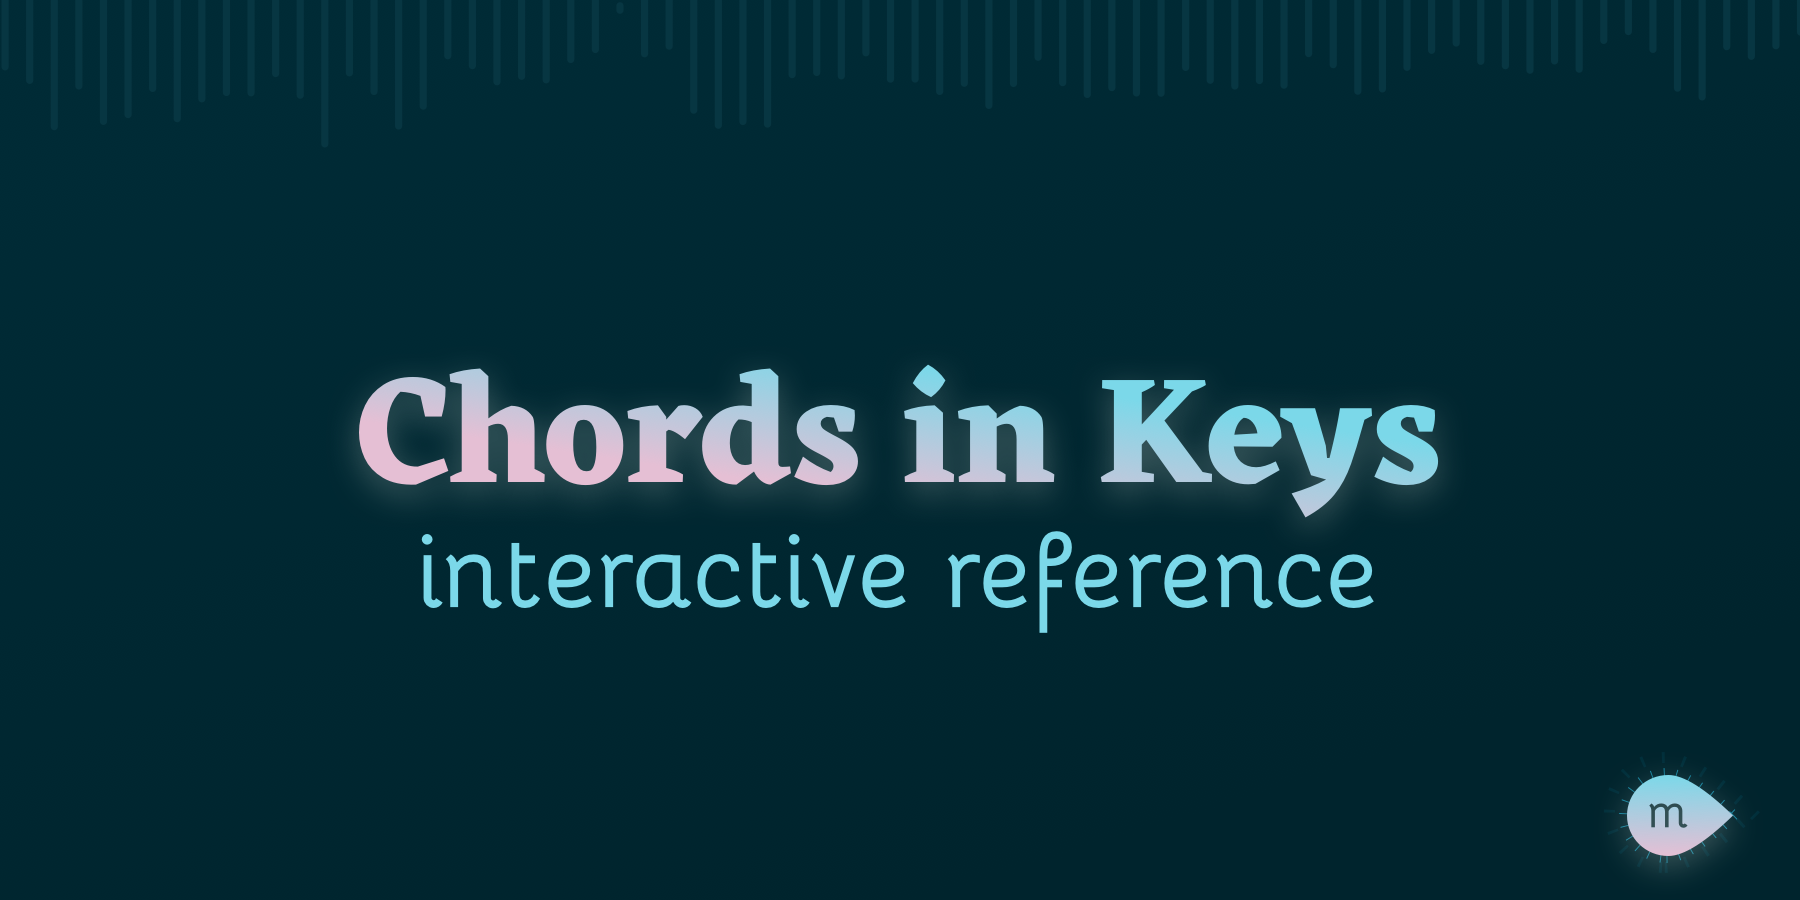 Chords in Keys: Diatonic Chord Player for Major & Minor Keys | muted.io